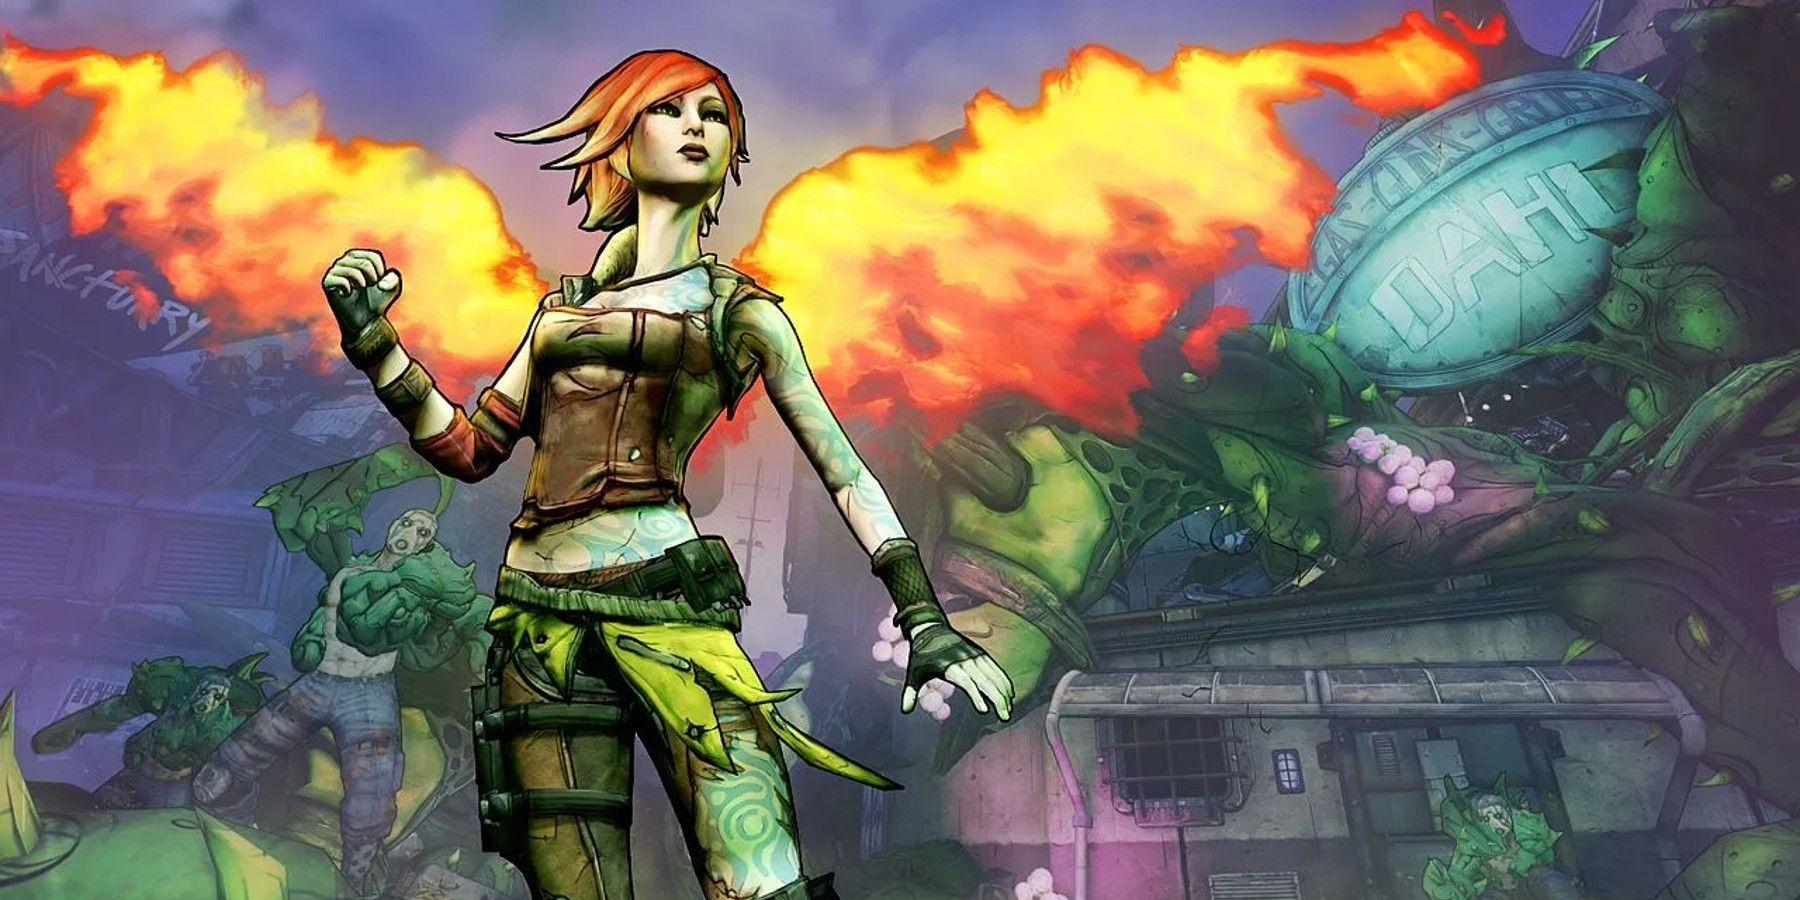 Borderlands 2 DLC art with Lilith